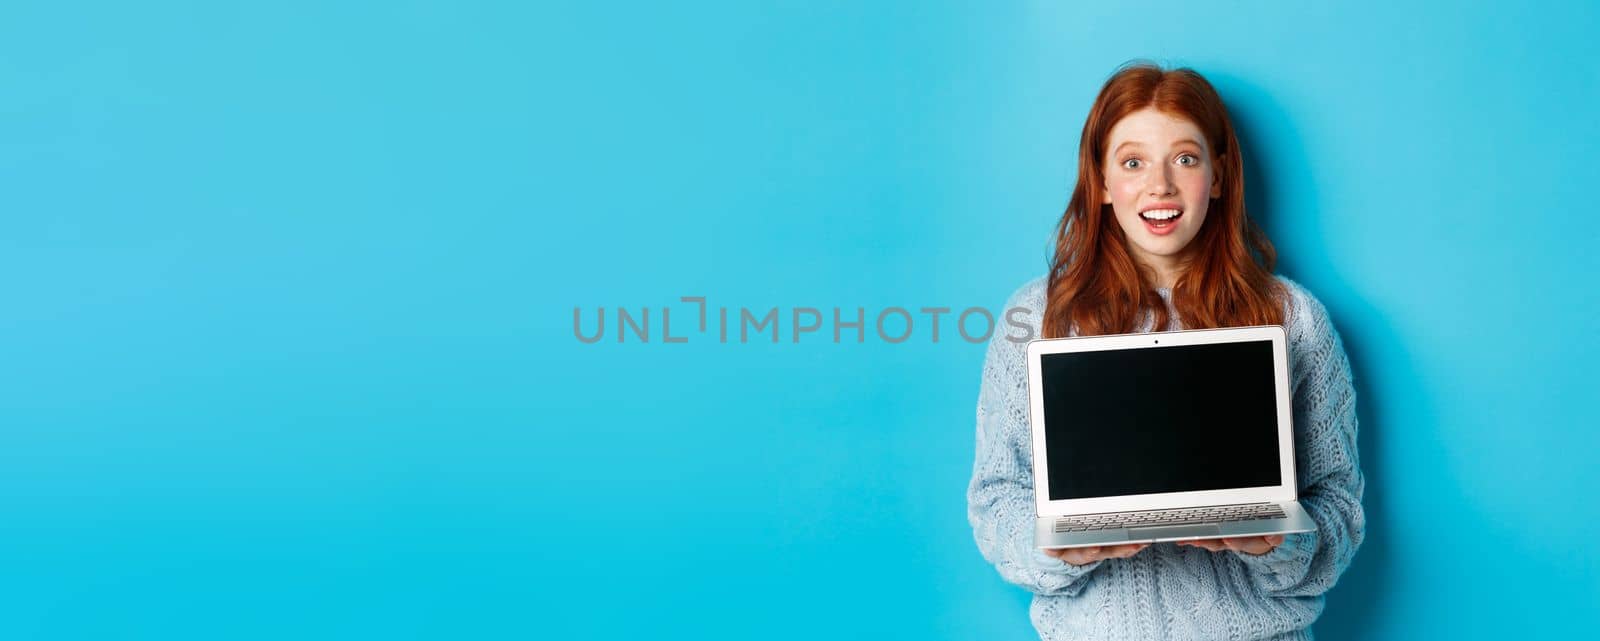 Excited redhead female freelancer showing laptop screen, staring at camera amazed, standing with computer against blue background.